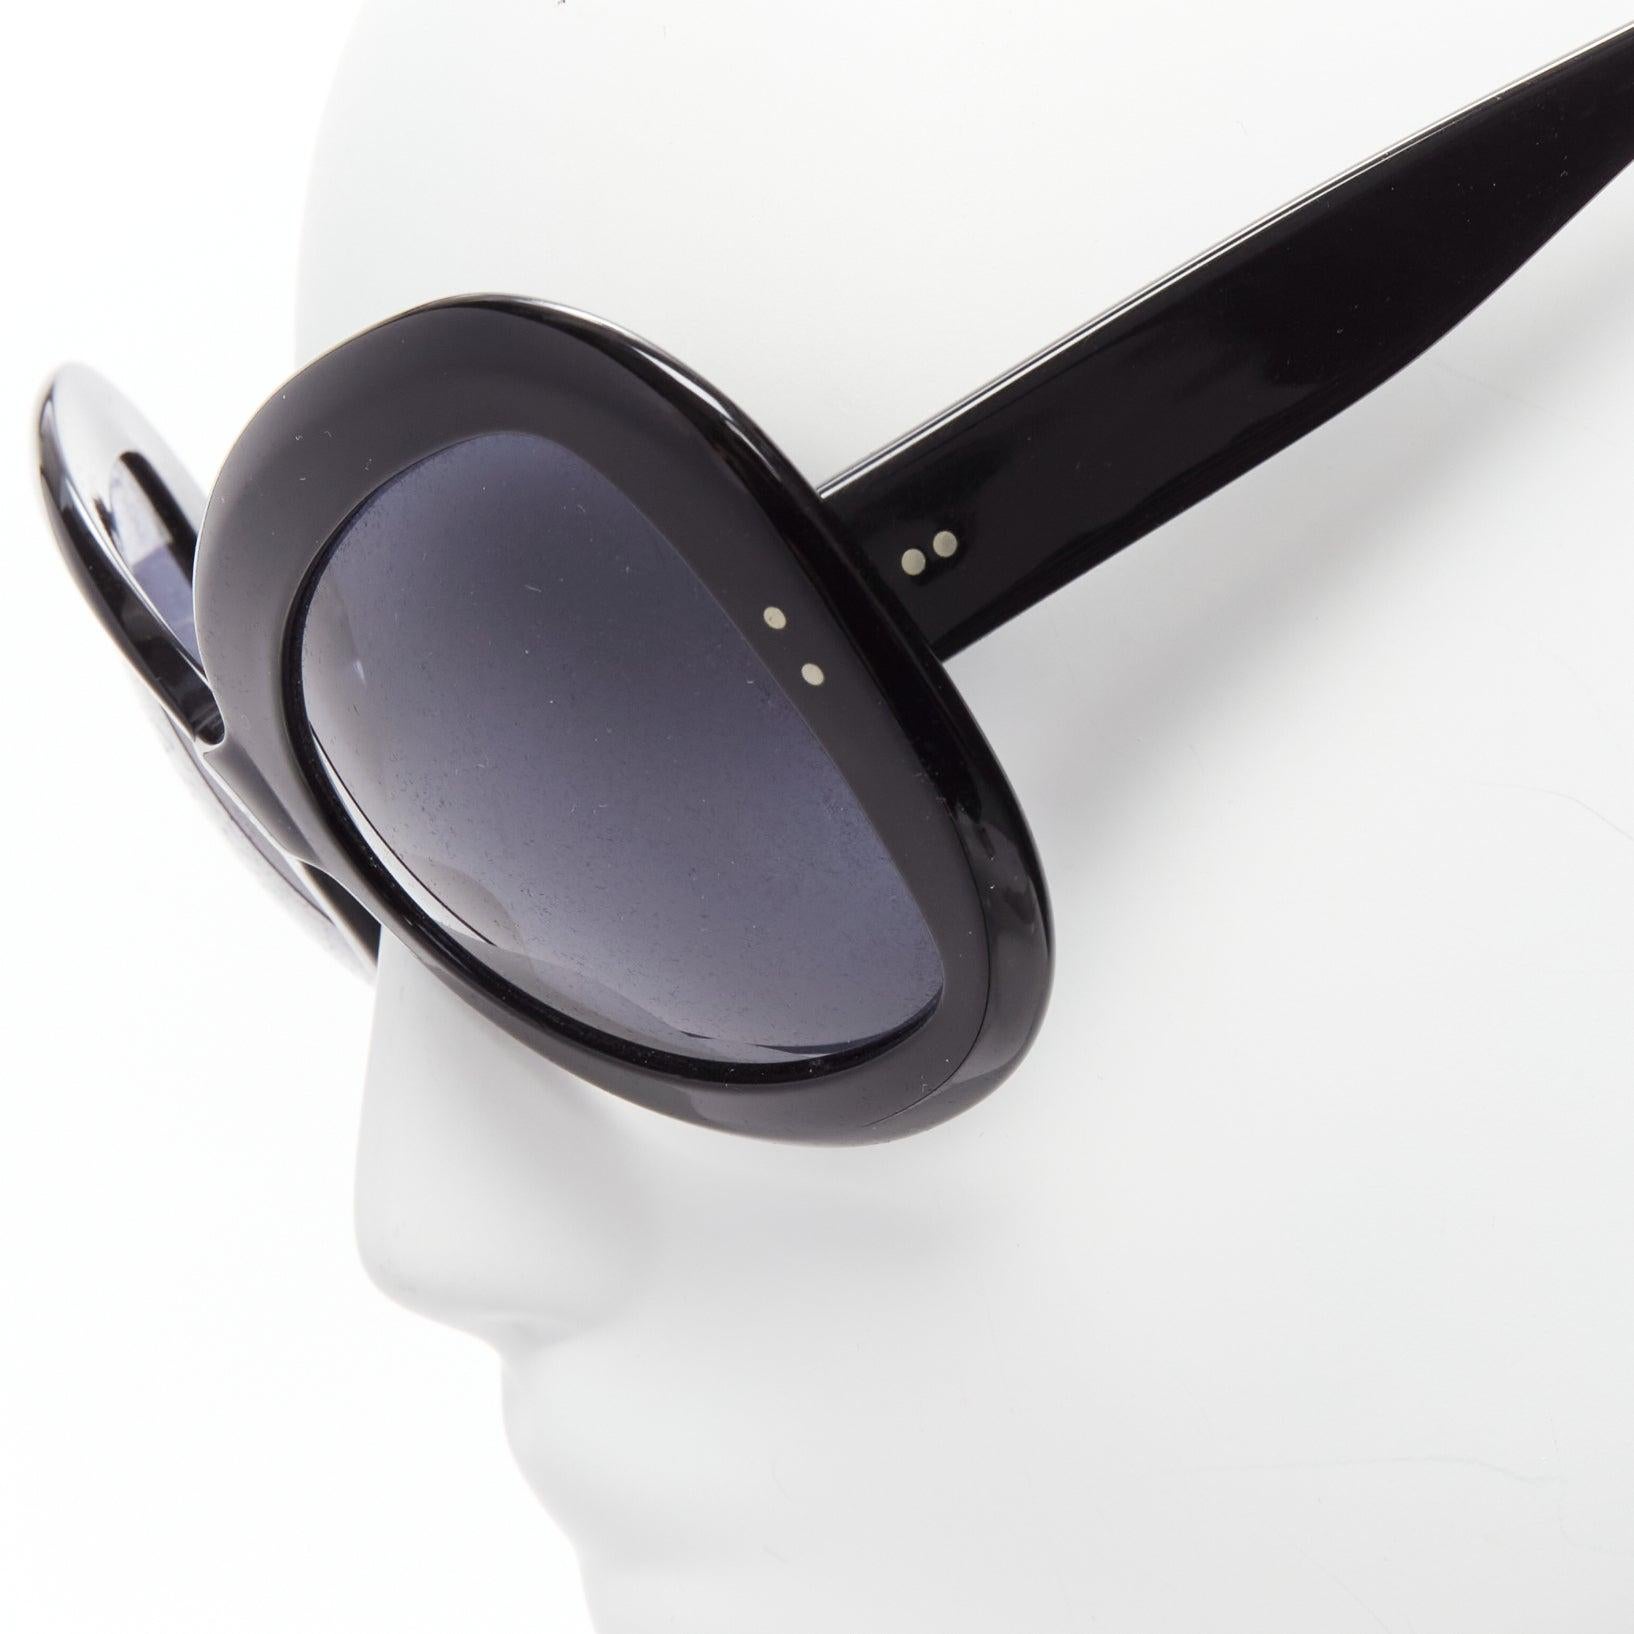 CUTLER AND GROSS M0812 black grey lens butterfly bug eye sunglasses
Reference: BSHW/A00101
Brand: Cutler and Gross
Model: M0812
Material: Acrylic
Color: Black, Grey
Pattern: Solid
Lining: Black Acrylic
Extra Details: Side